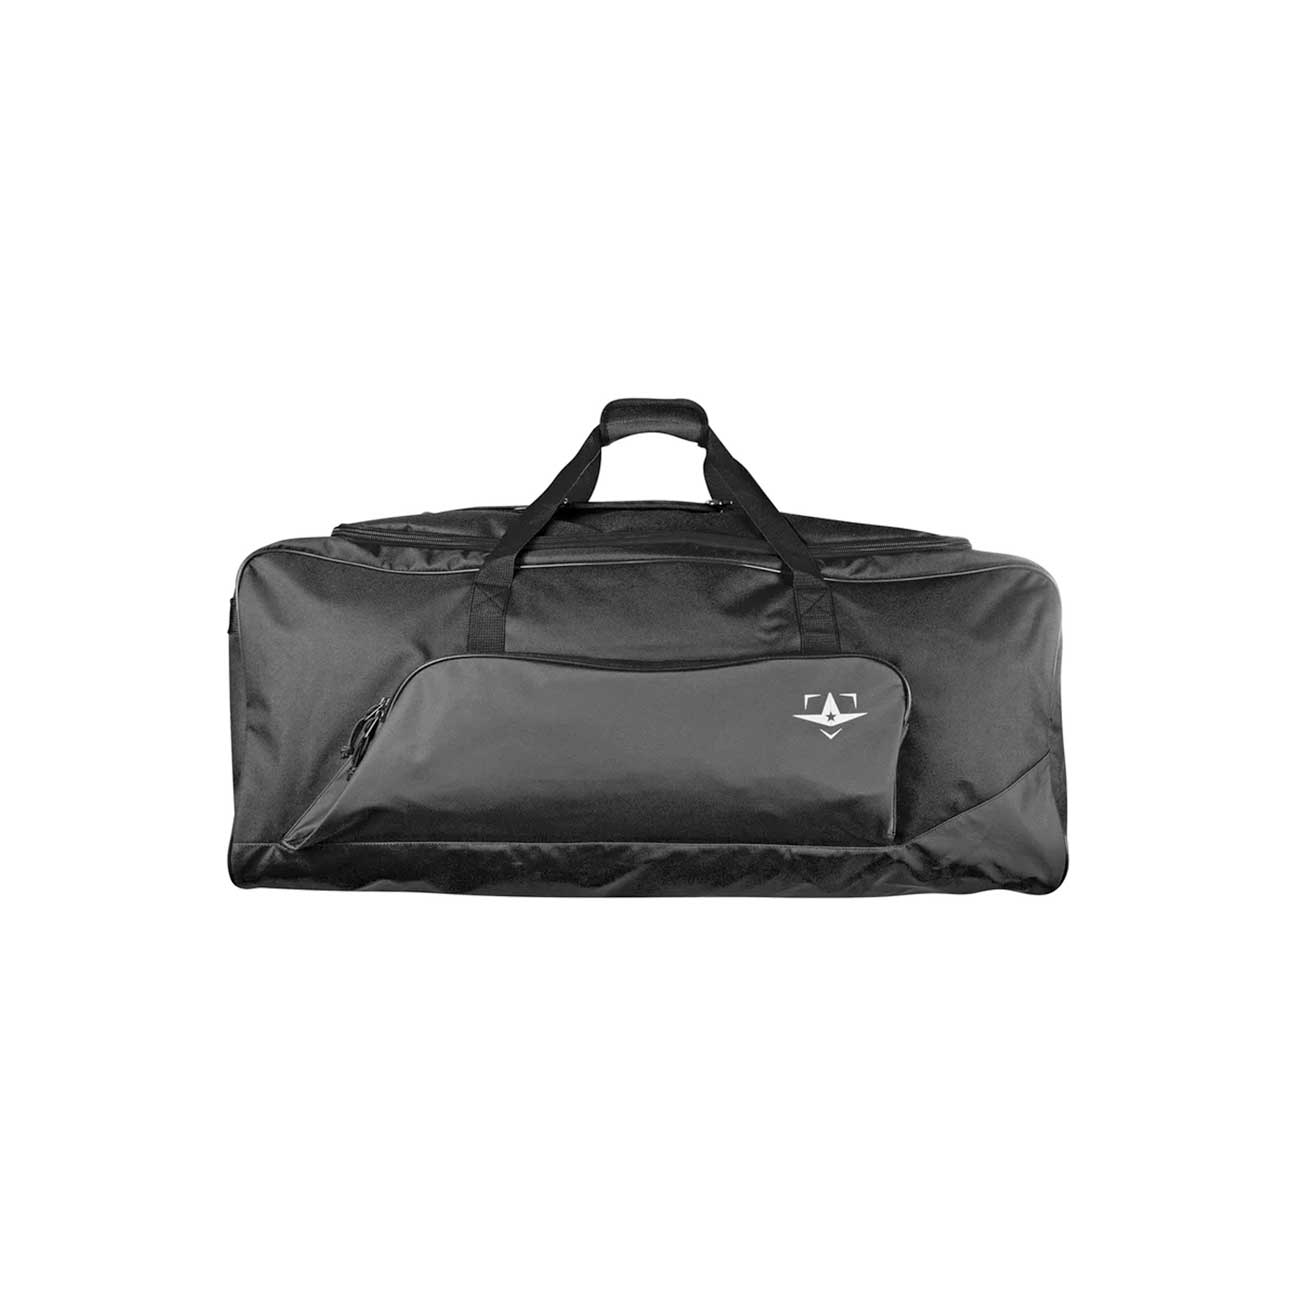 All-Star Classic Pro Carry Bag